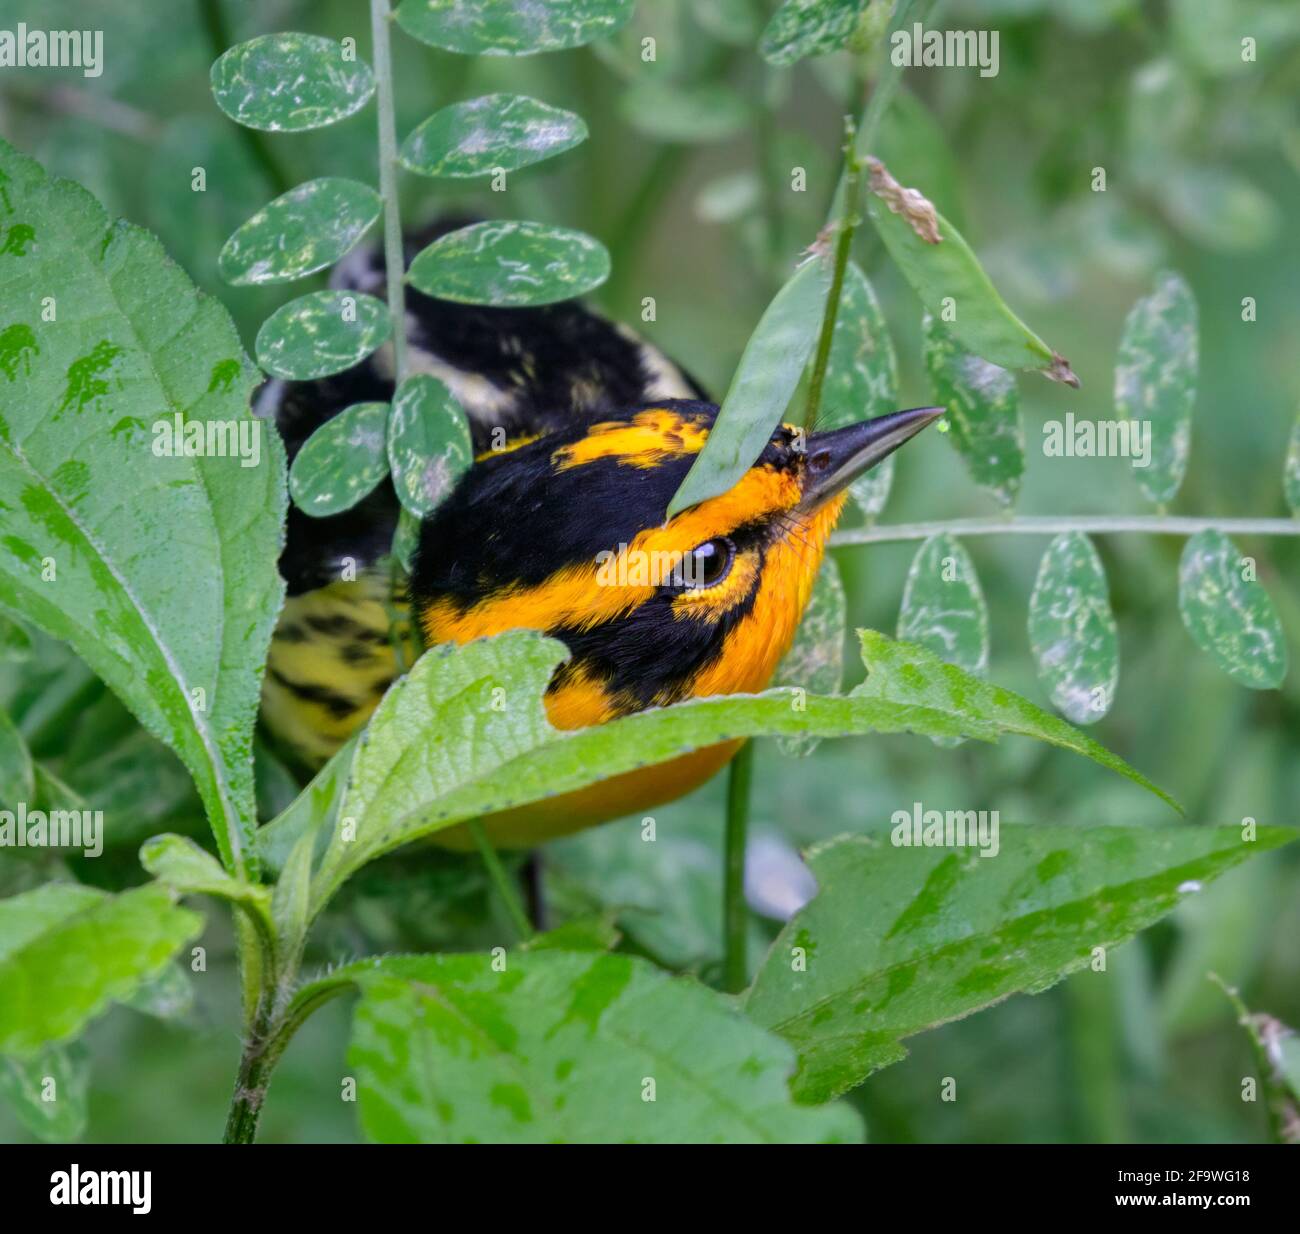 Blackburnian warbler (Setophaga fusca) male hunting insects in the grass, Galveston, Texas. Stock Photo